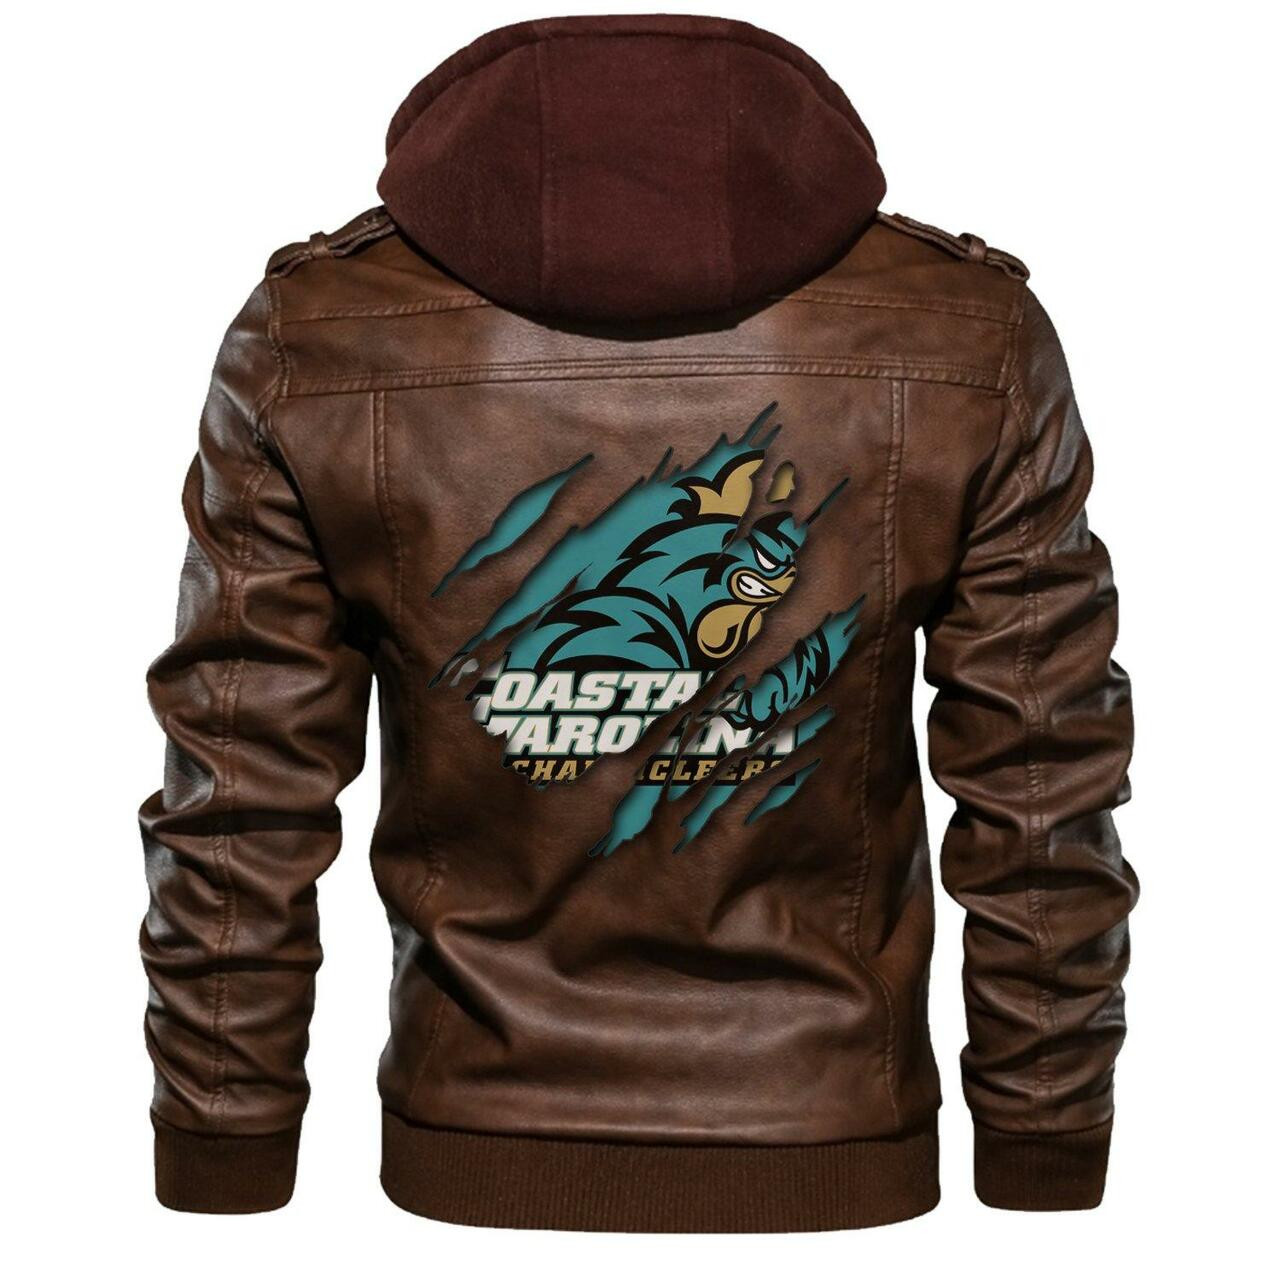 You'll get the best Leather Jacket by shopping online 163